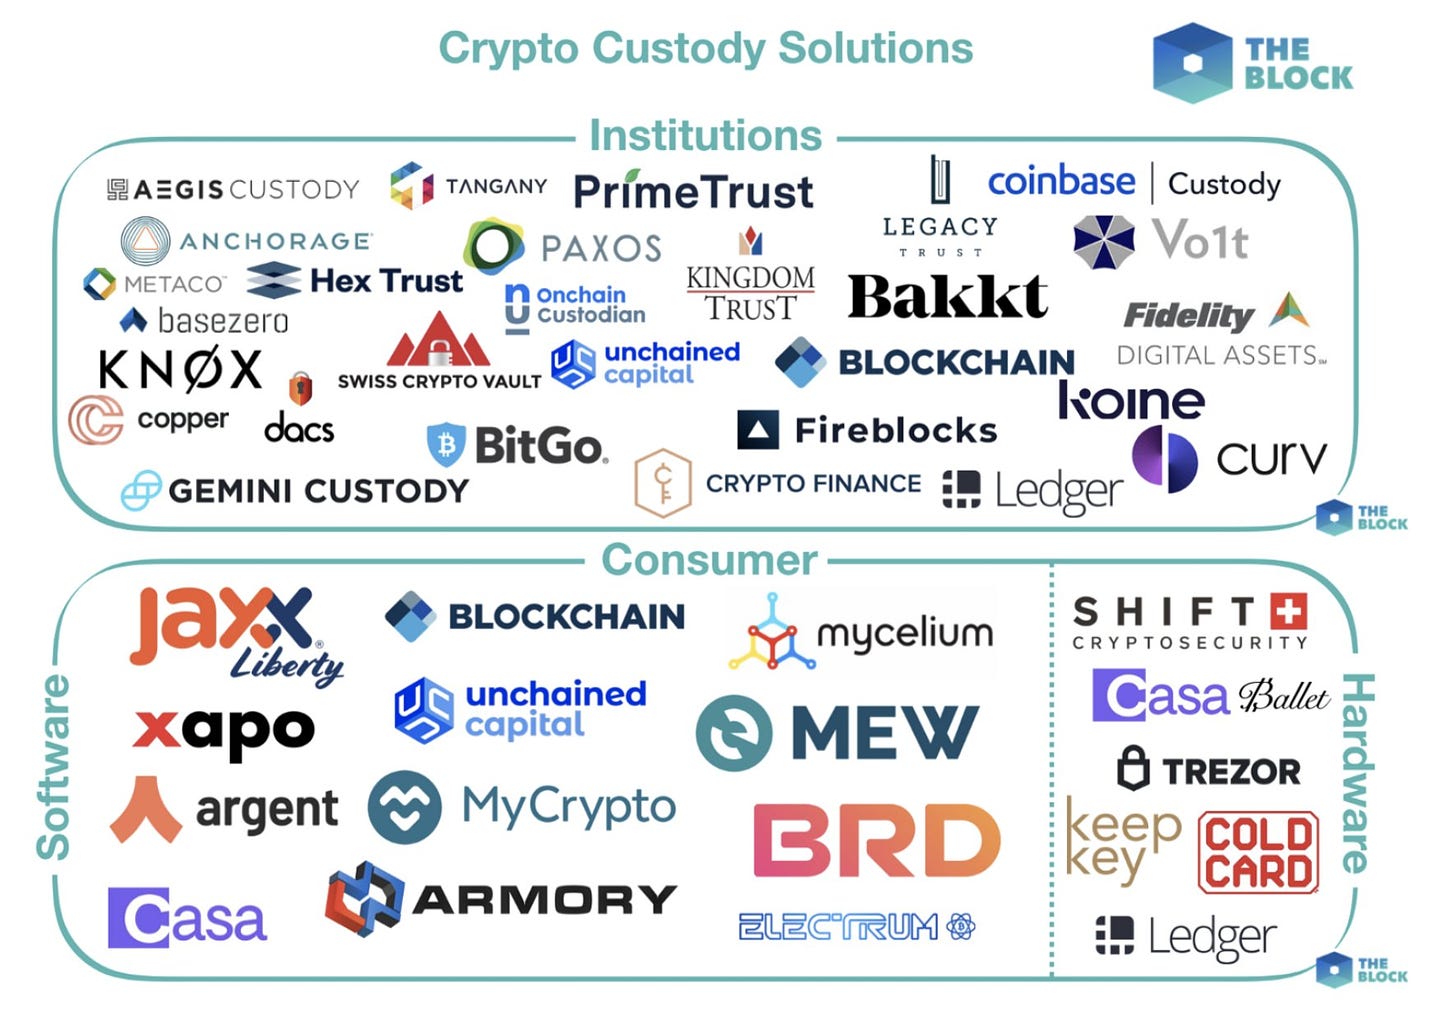 twan on Twitter: "1/ We have analyzed the Digital Asset Custody landscape. Digital  assets, like Bitcoin, present new challenges that legacy financial firms  aren't equipped or familiar with. We have broken down